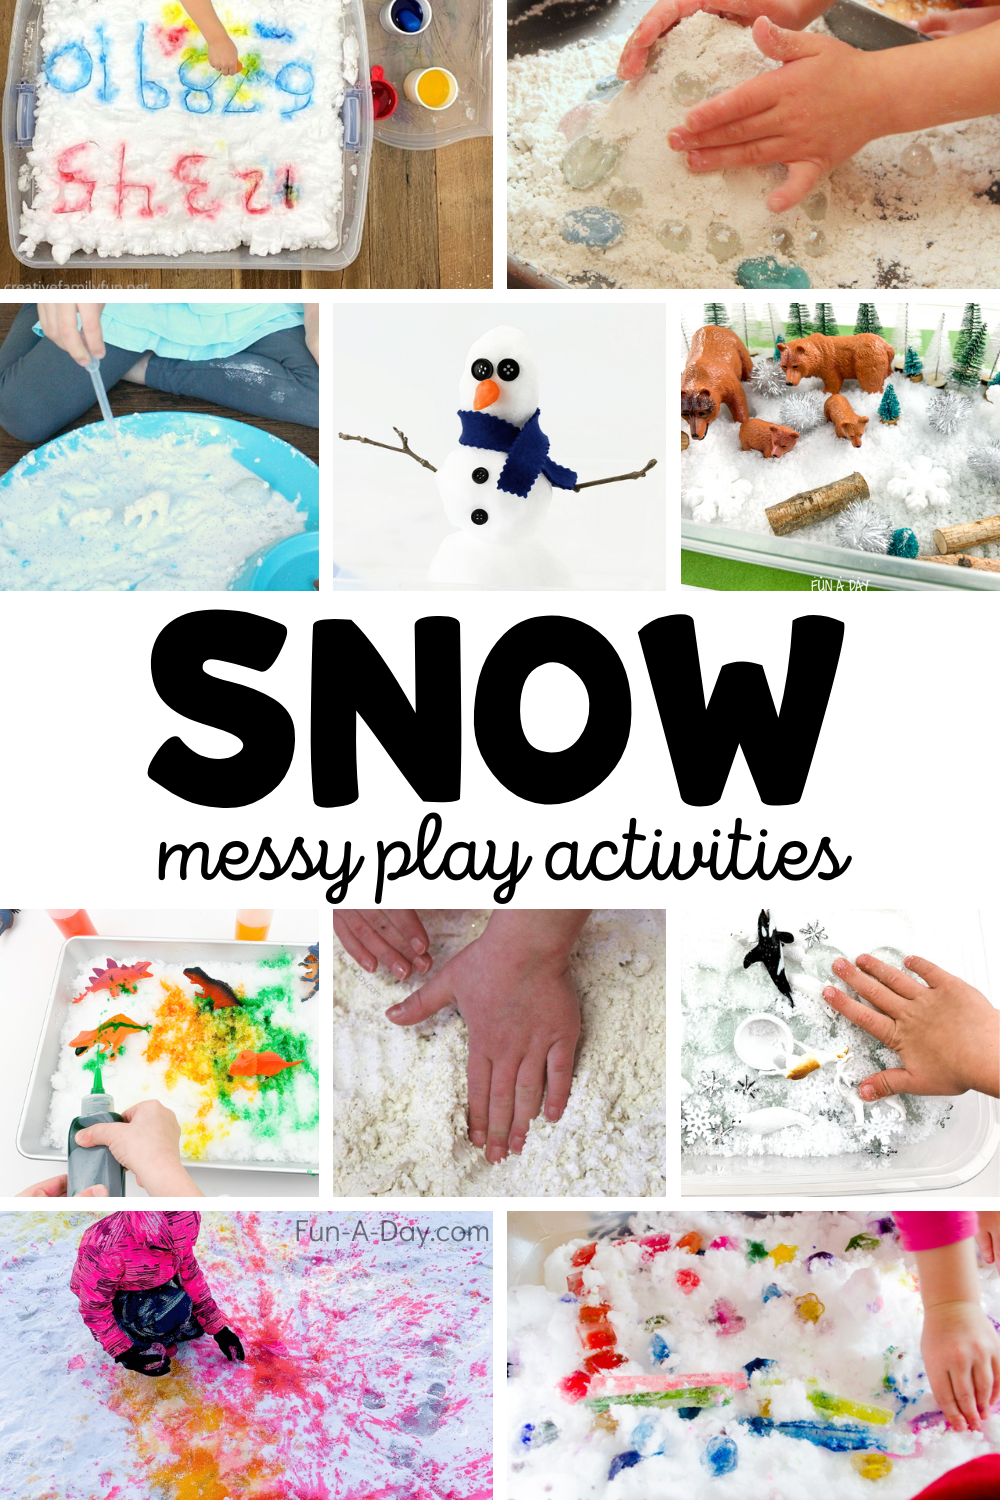 snow ideas with text that reads snow messy play activities